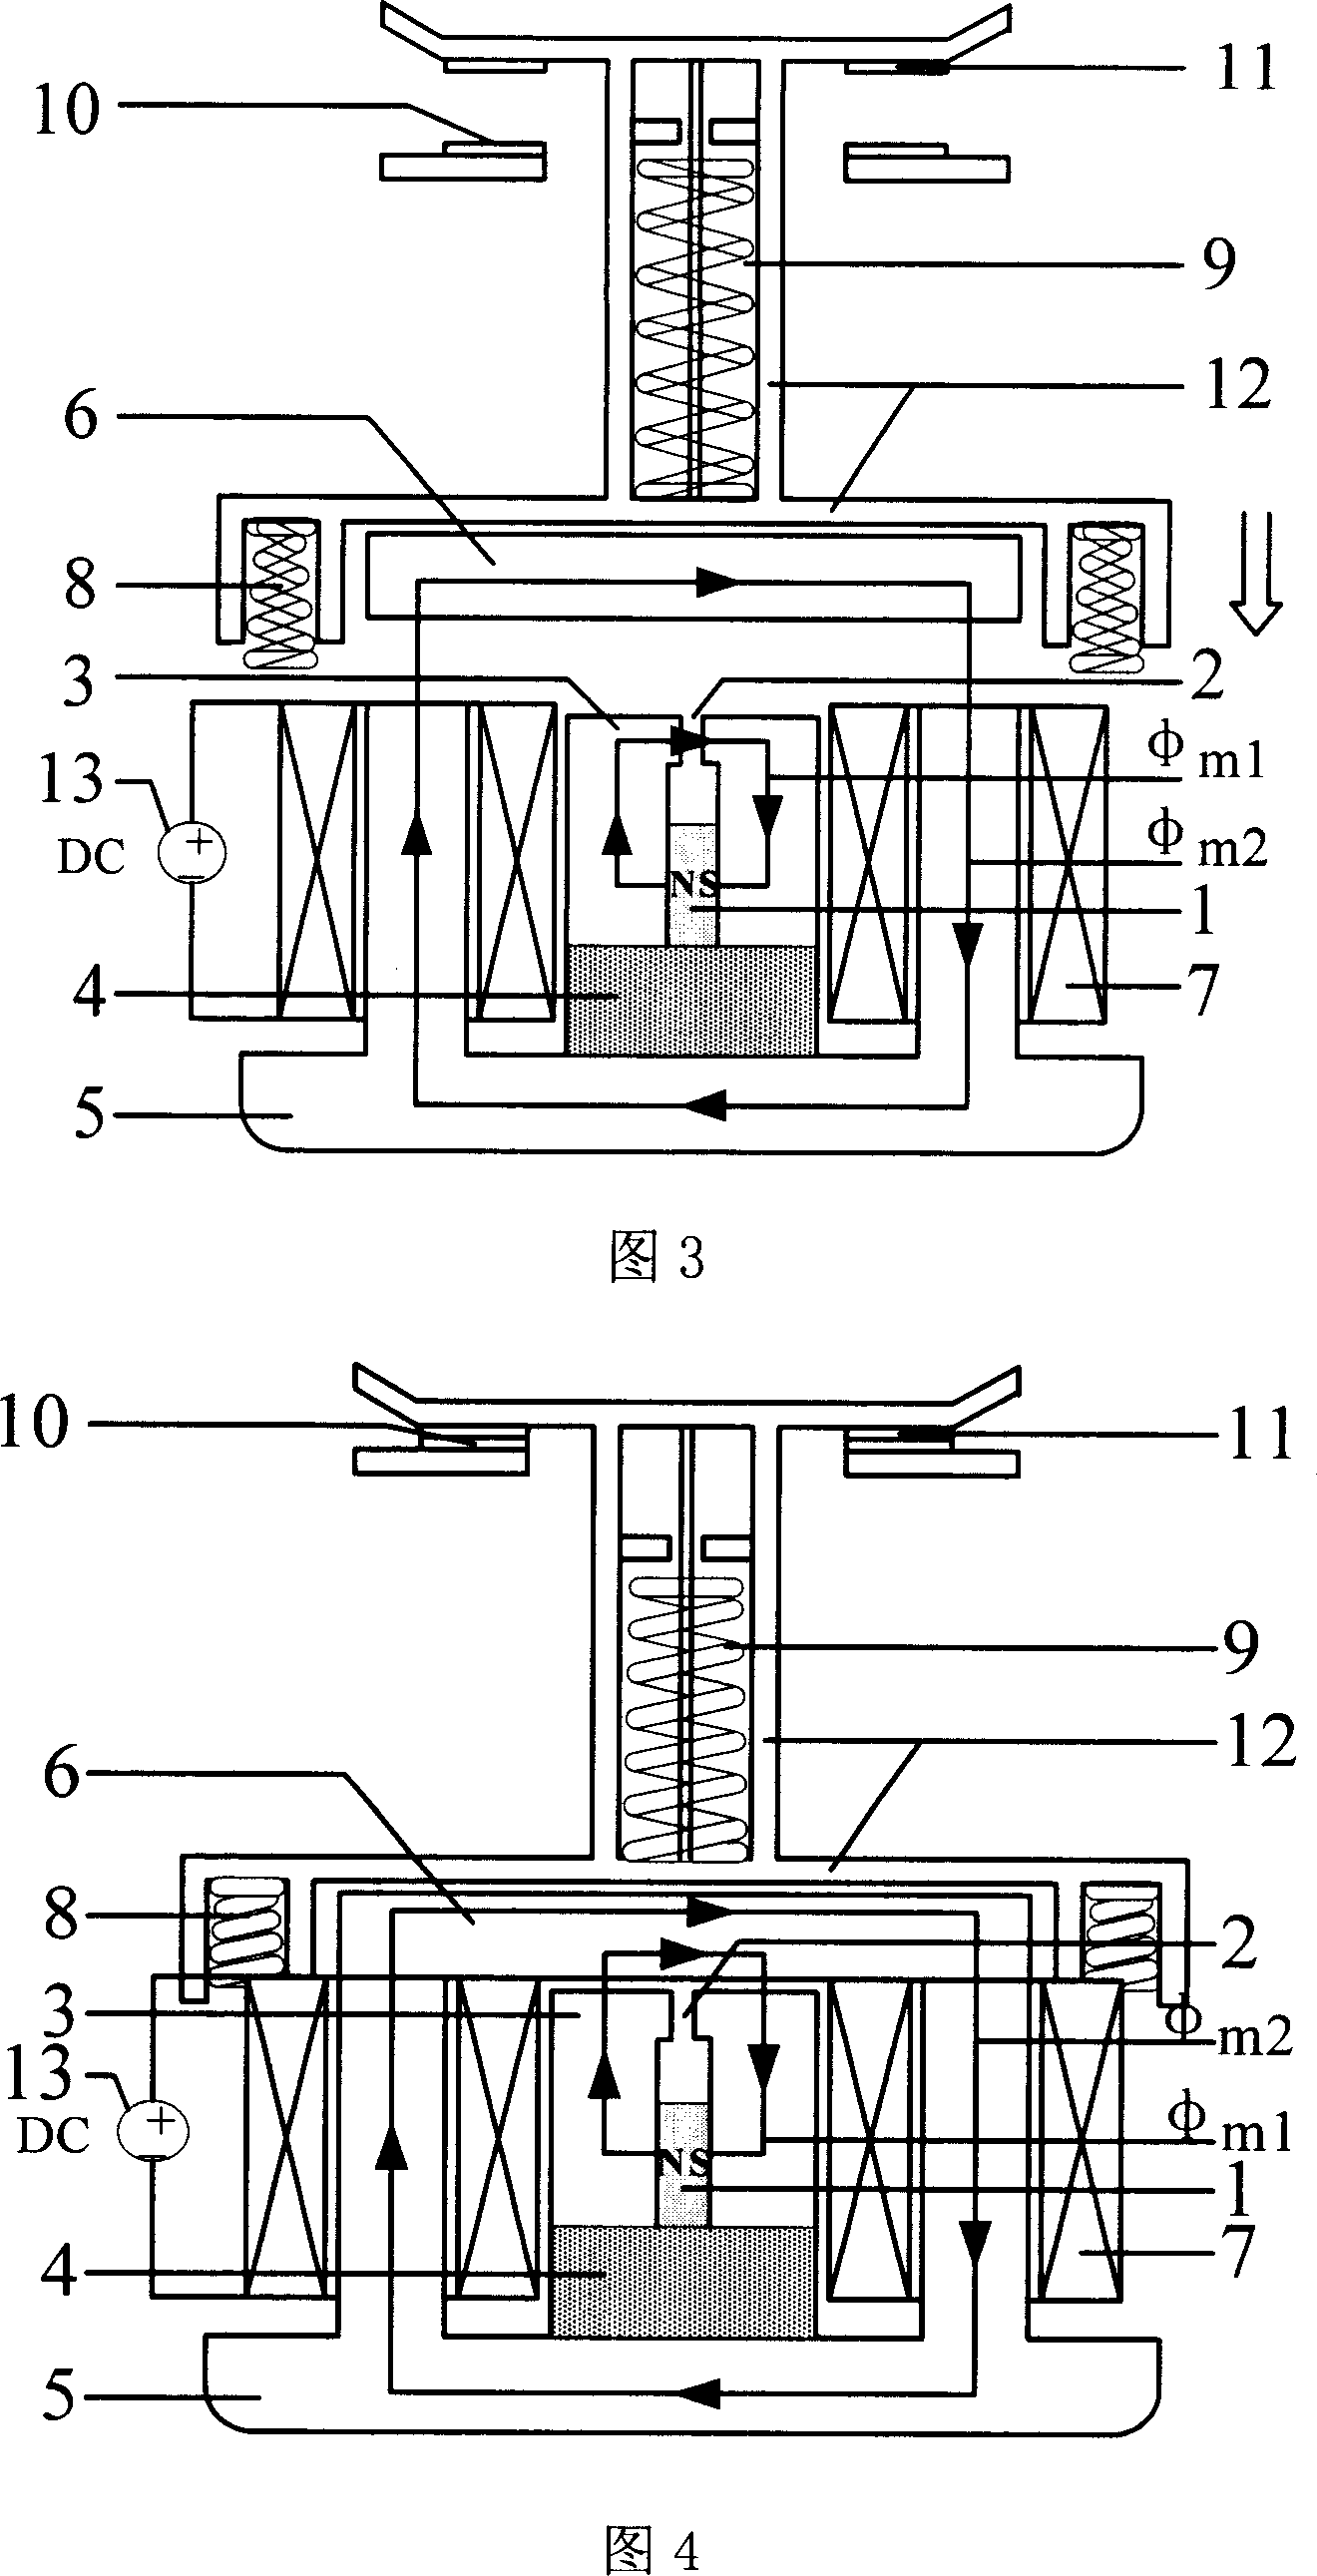 Permanent magnet mechanism contactor with parallel magnetic path